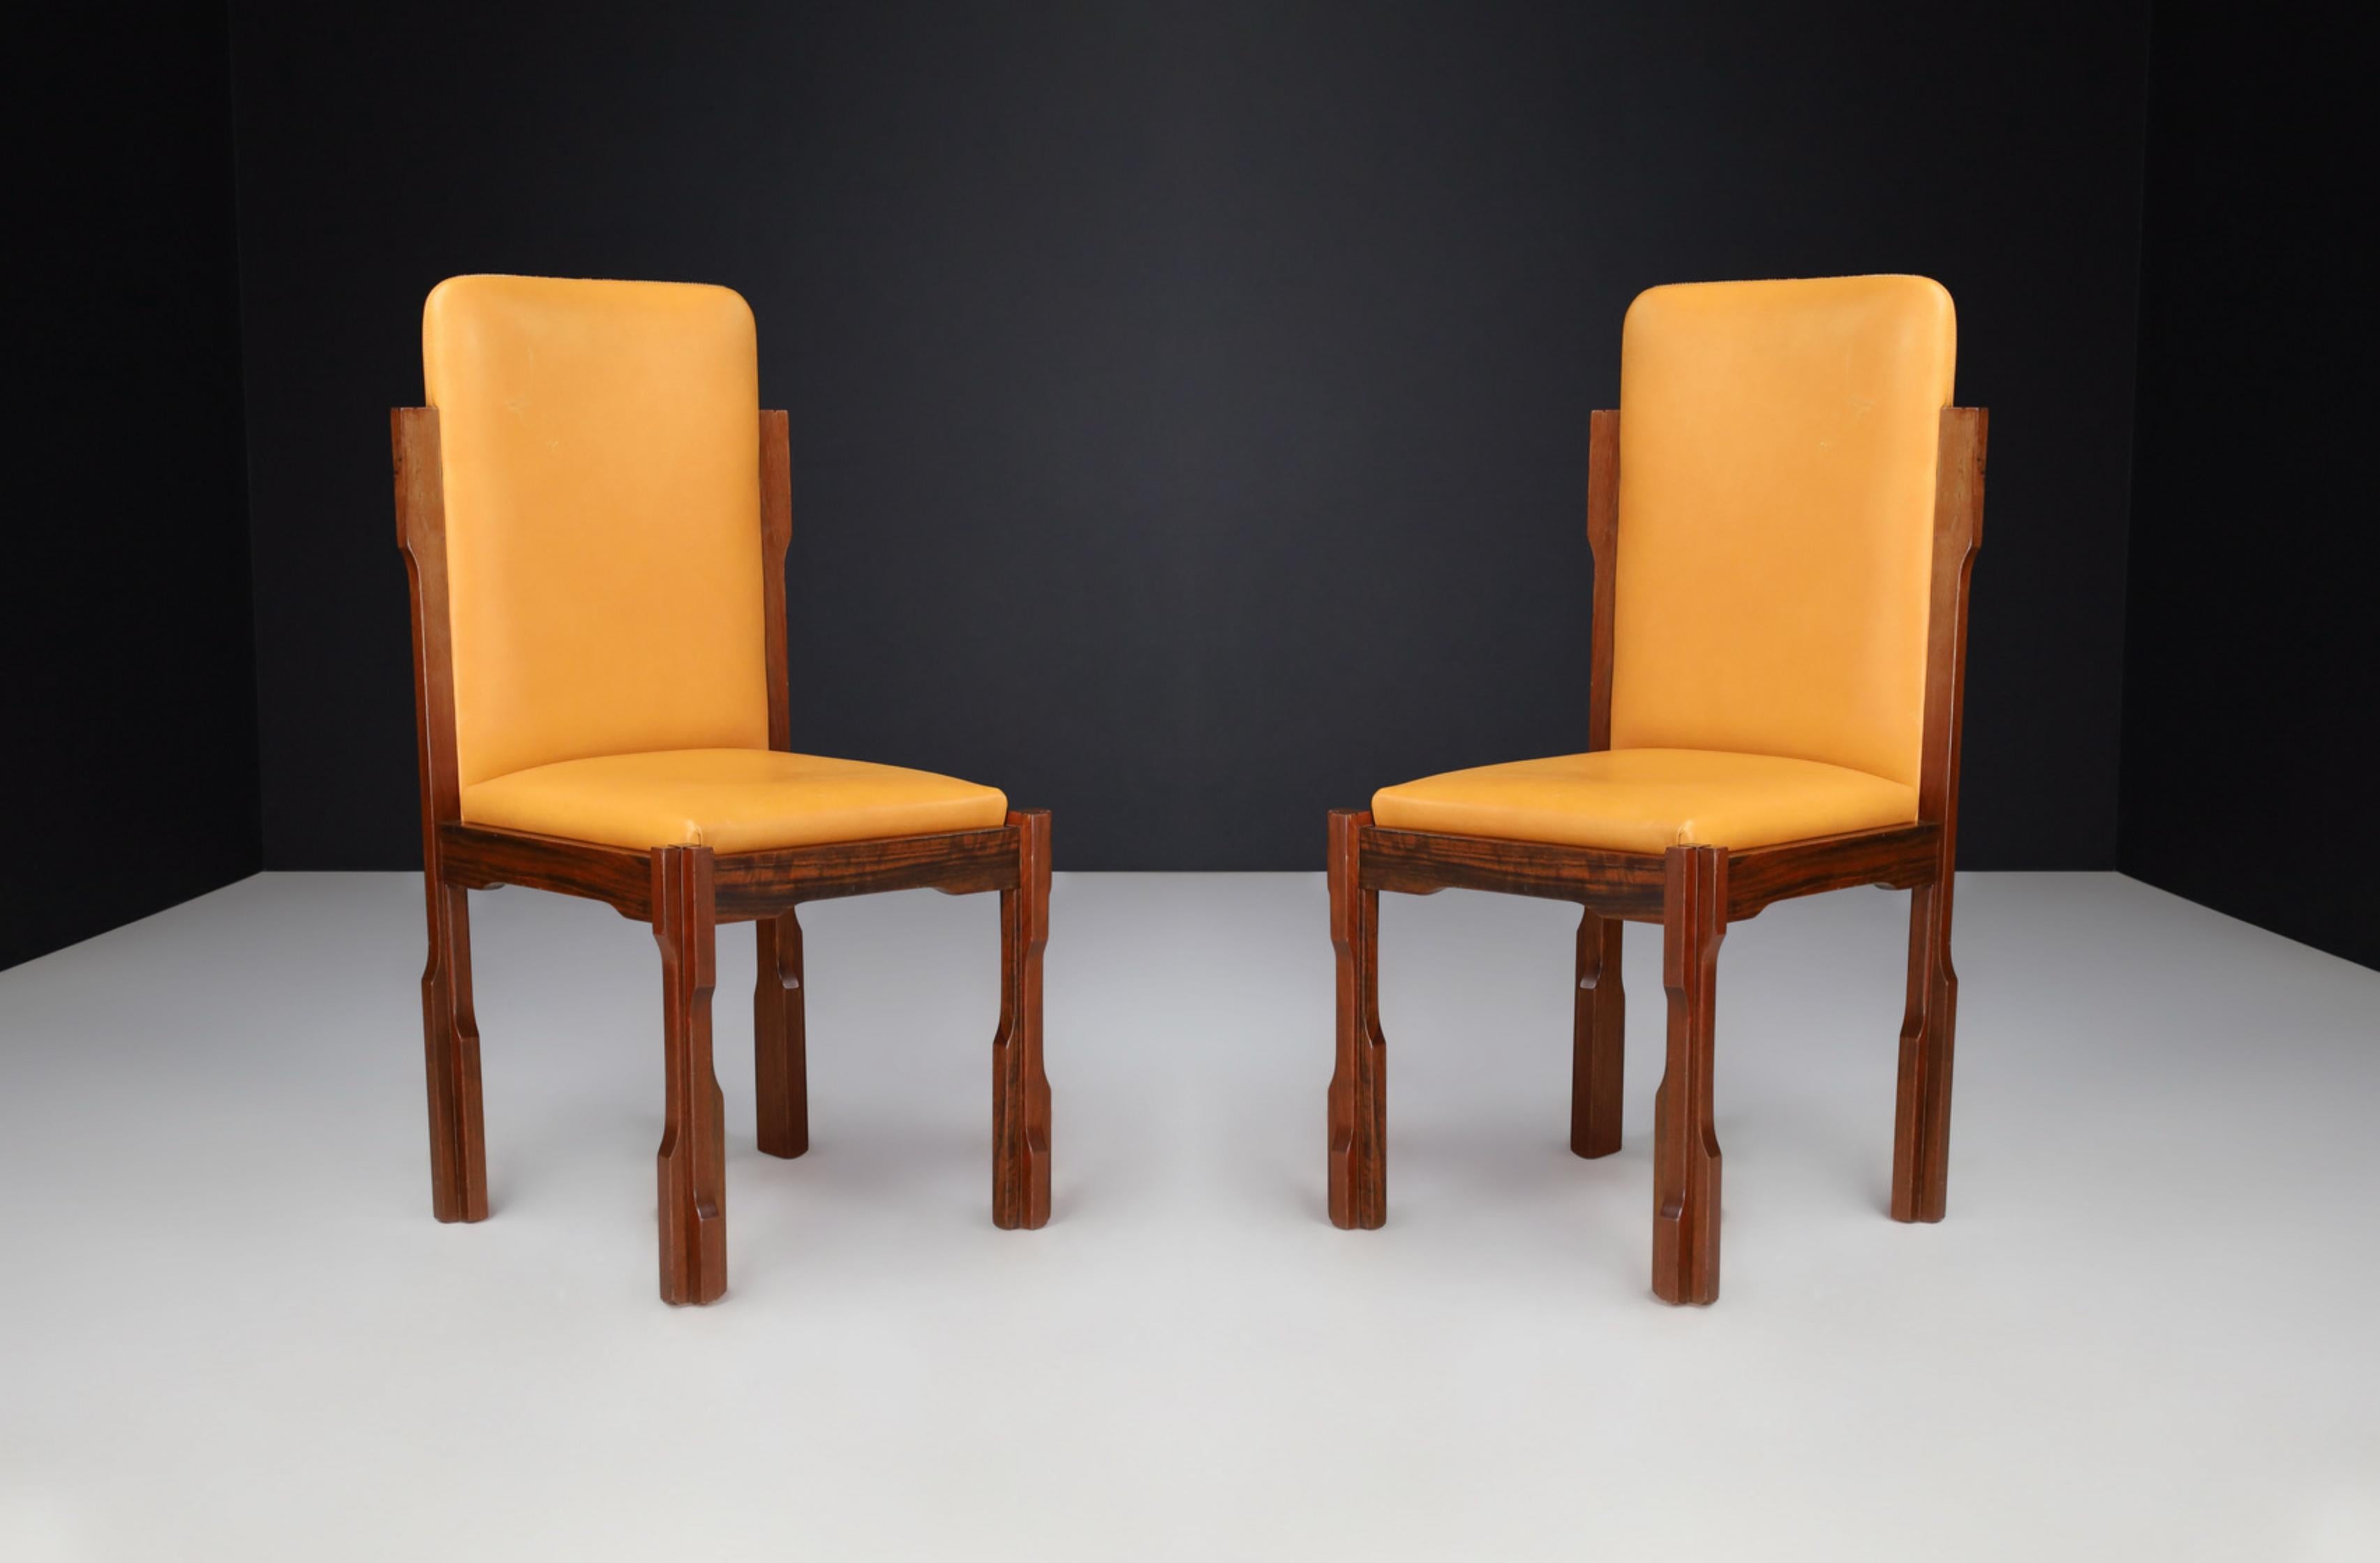 Luciano Frigerio Walnut and Leather Desk Chairs, Italy 1970s.
These chairs, part of the 